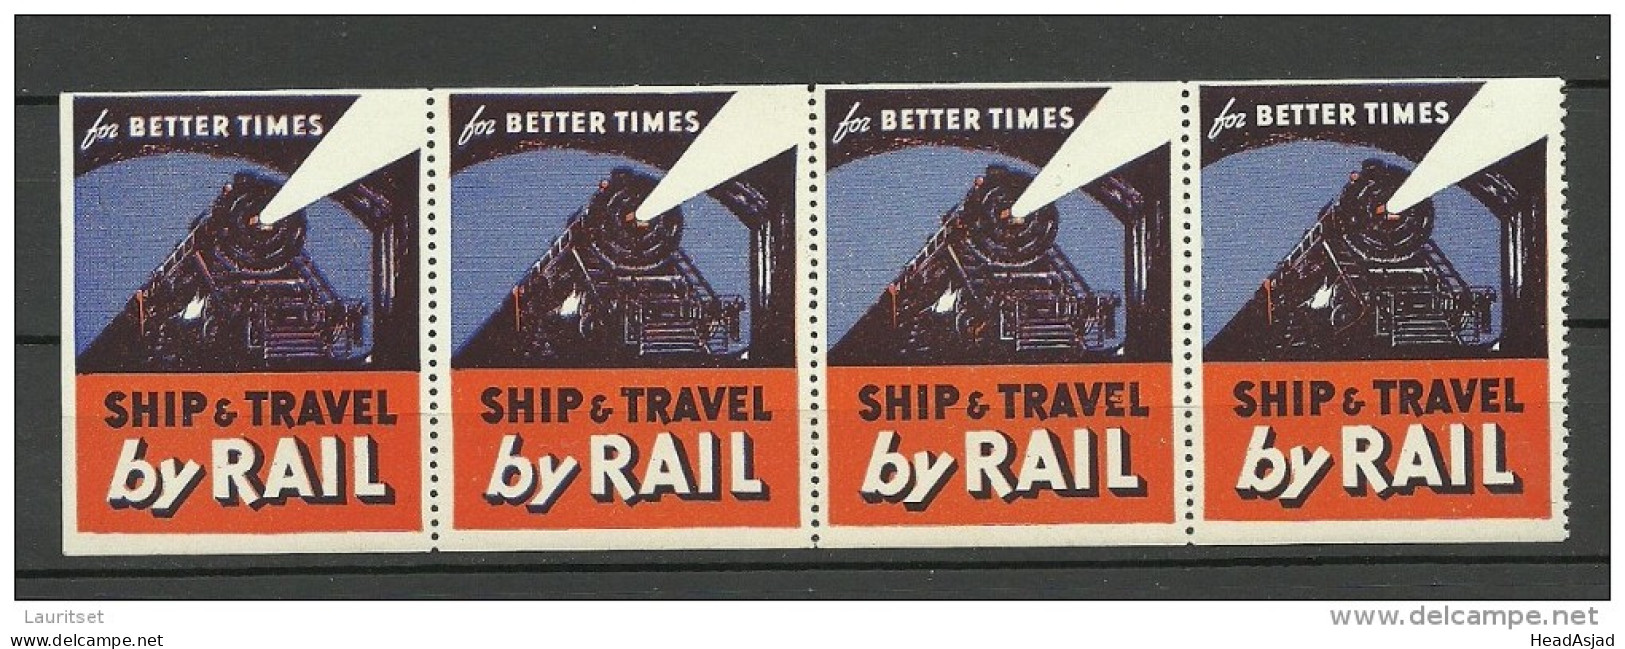 USA 1930ies Vignette Poster Stamp Ship And Travel By Trail Train 4-stripe MNH - Eisenbahnen